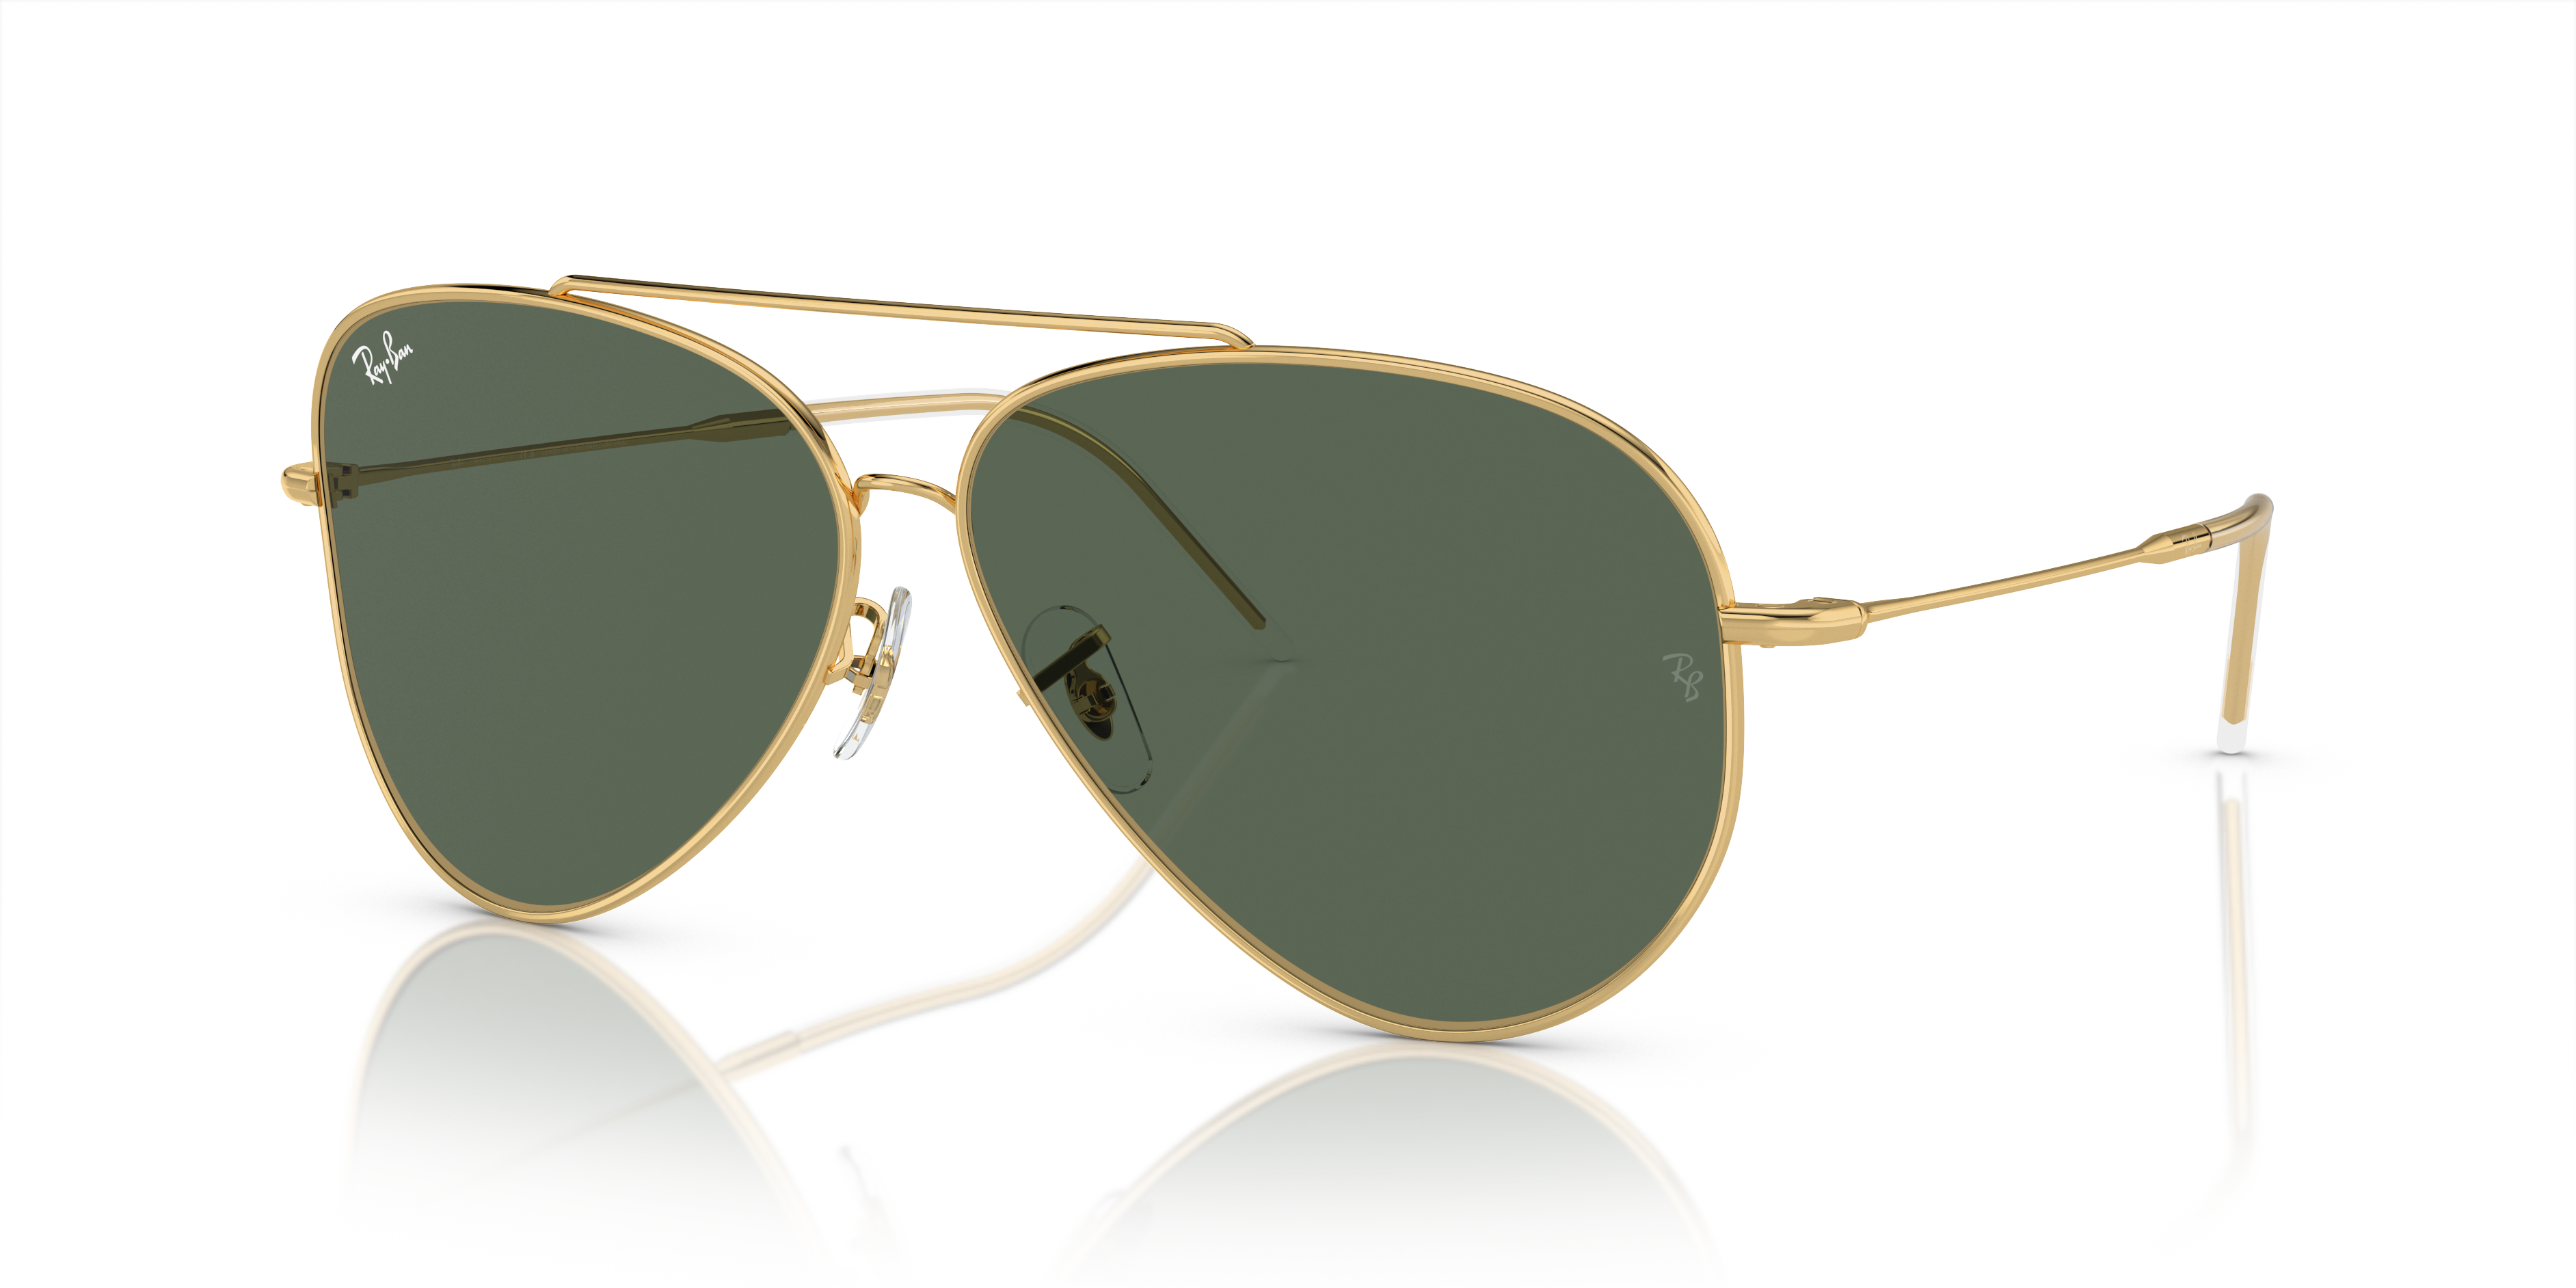 Angle_Left01 Ray-Ban Aviator Reverse RBR 0101S (92023A) Sunglasses Blue / Rose Gold